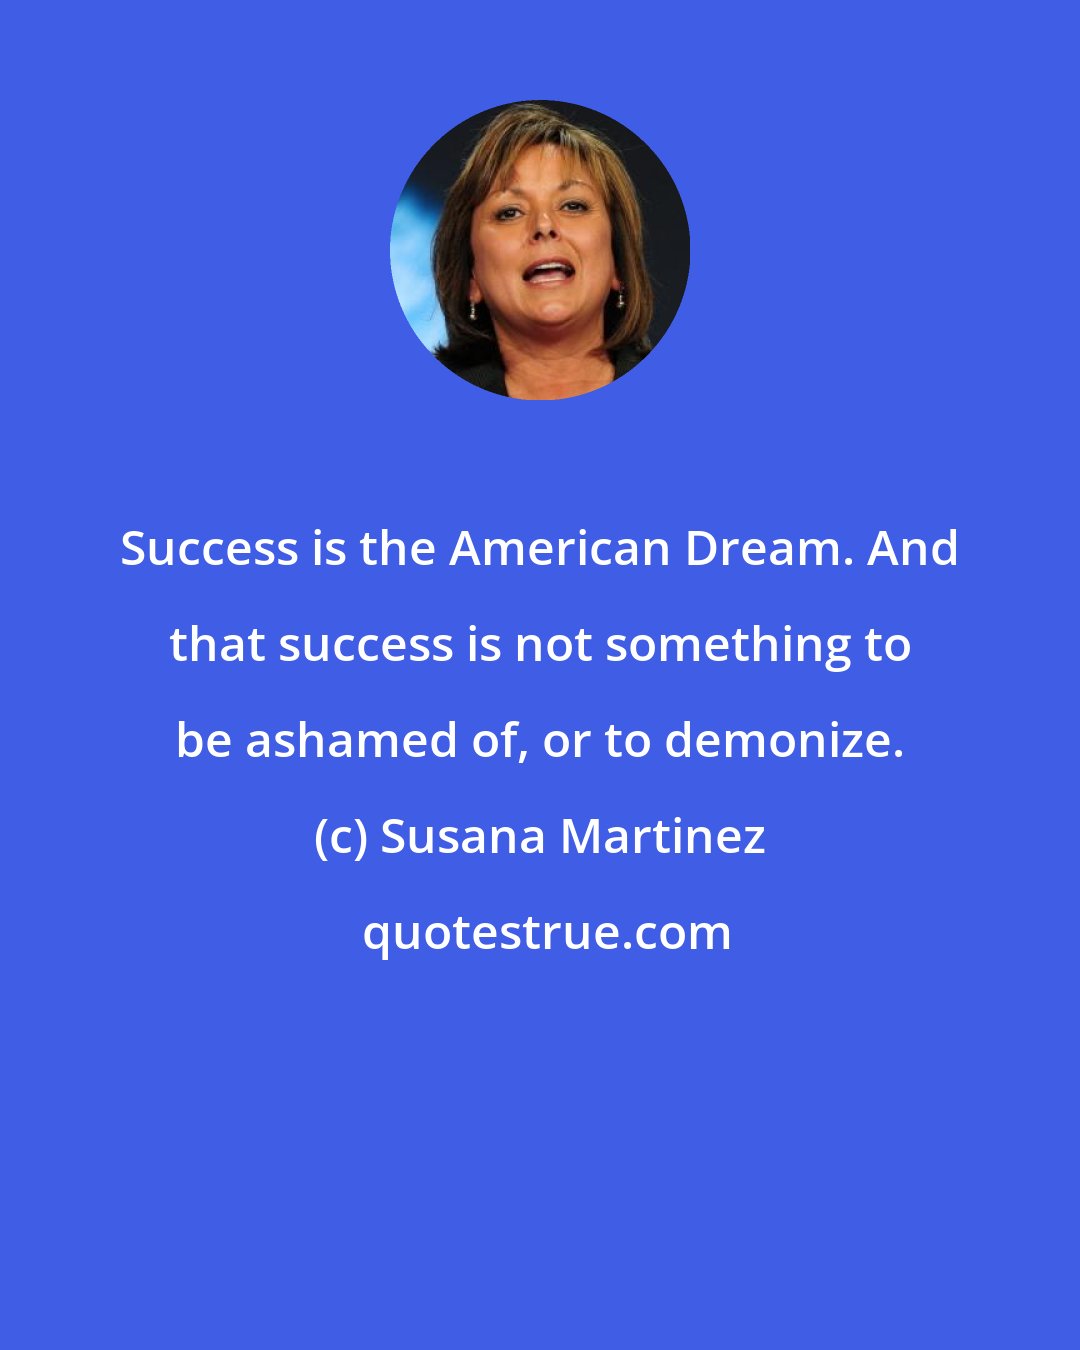 Susana Martinez: Success is the American Dream. And that success is not something to be ashamed of, or to demonize.